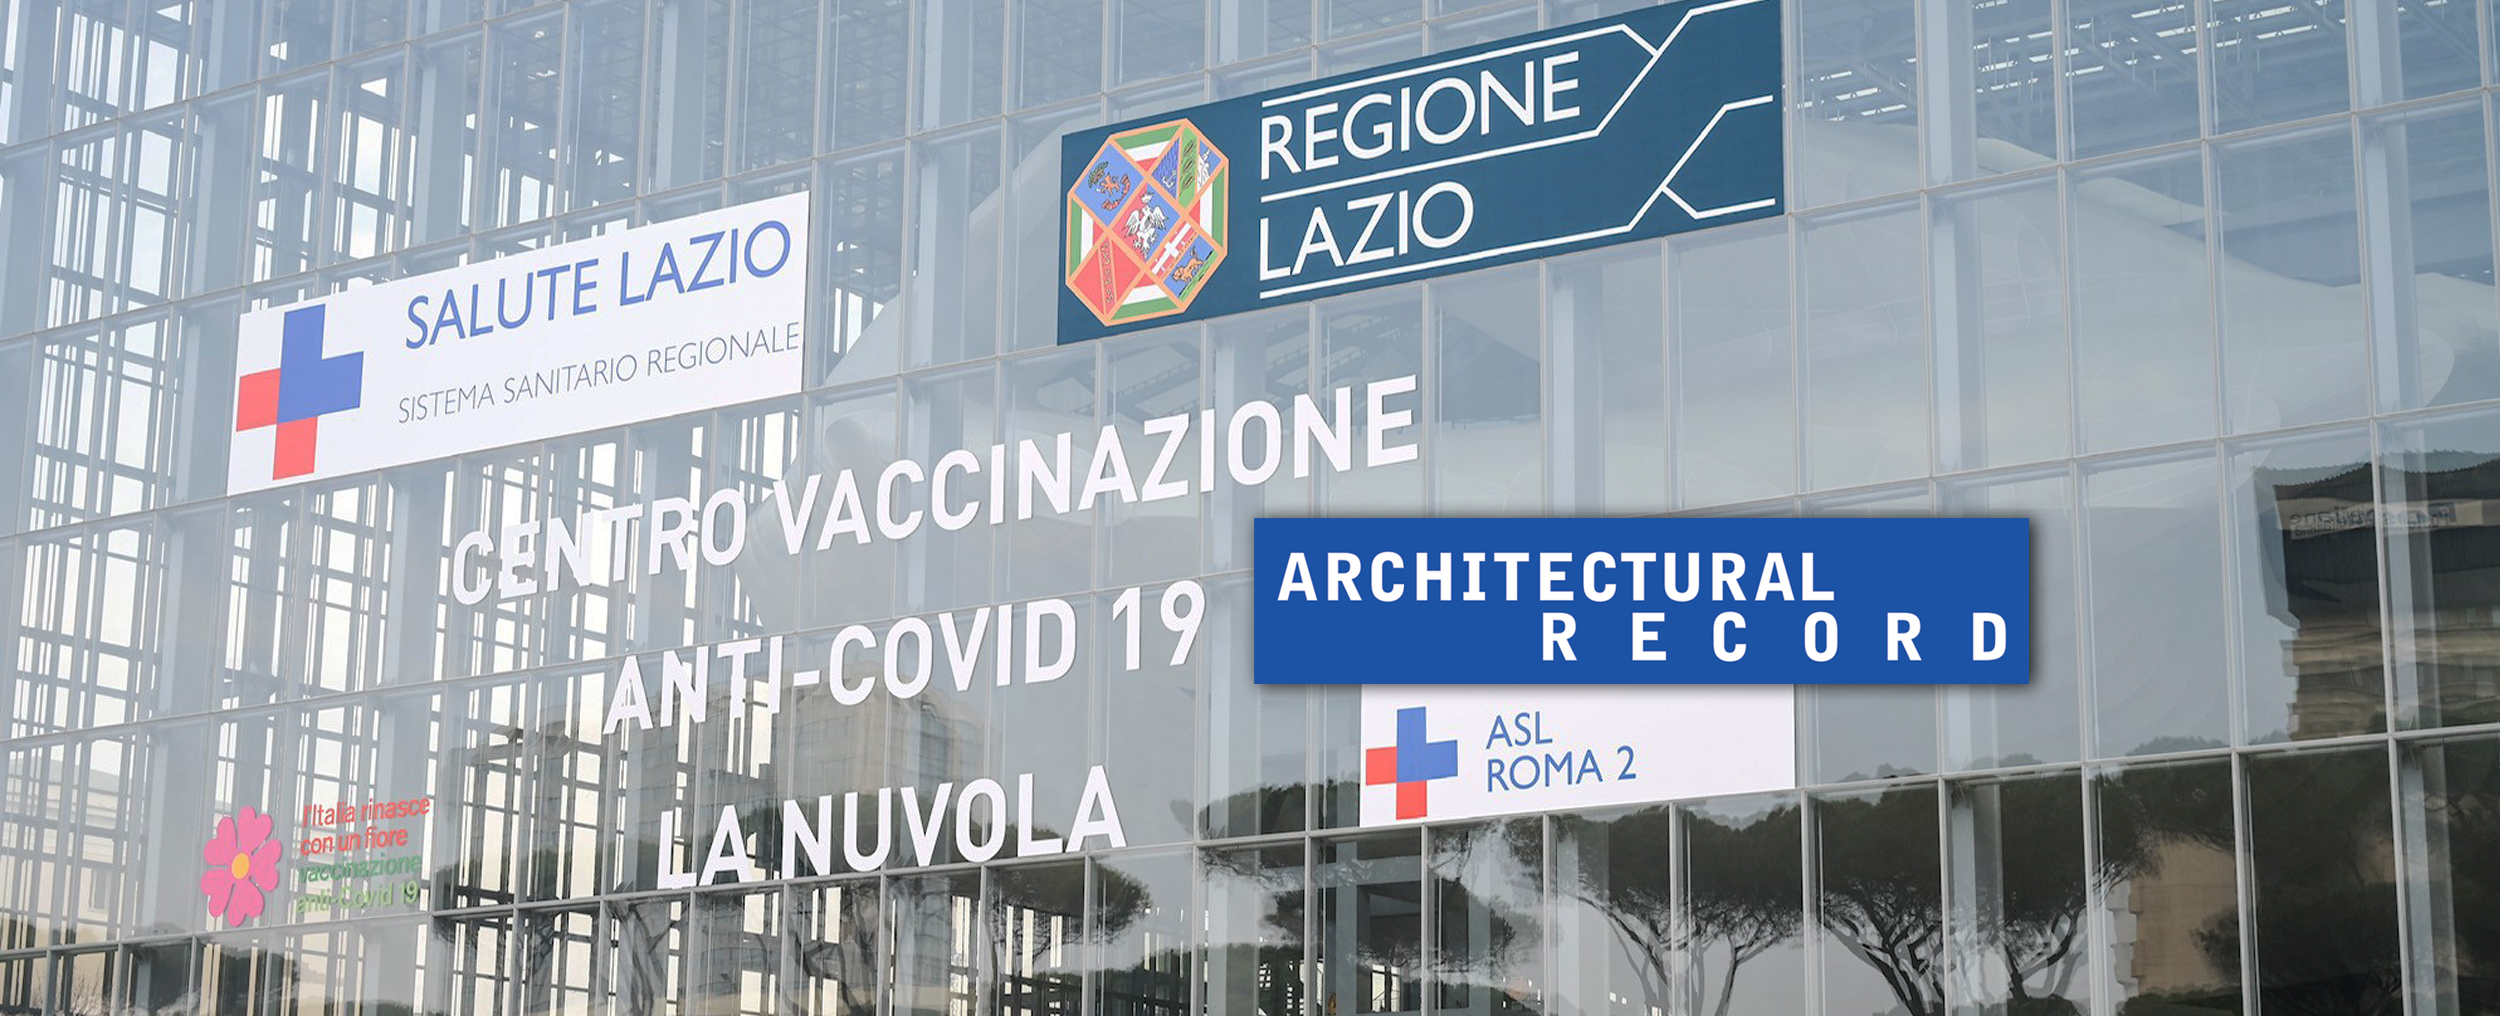 Rome's Convention Center “The Cloud” transformed Into Covid-19 Vaccination Hub - news on Architectural Record Magazine2021, May 4